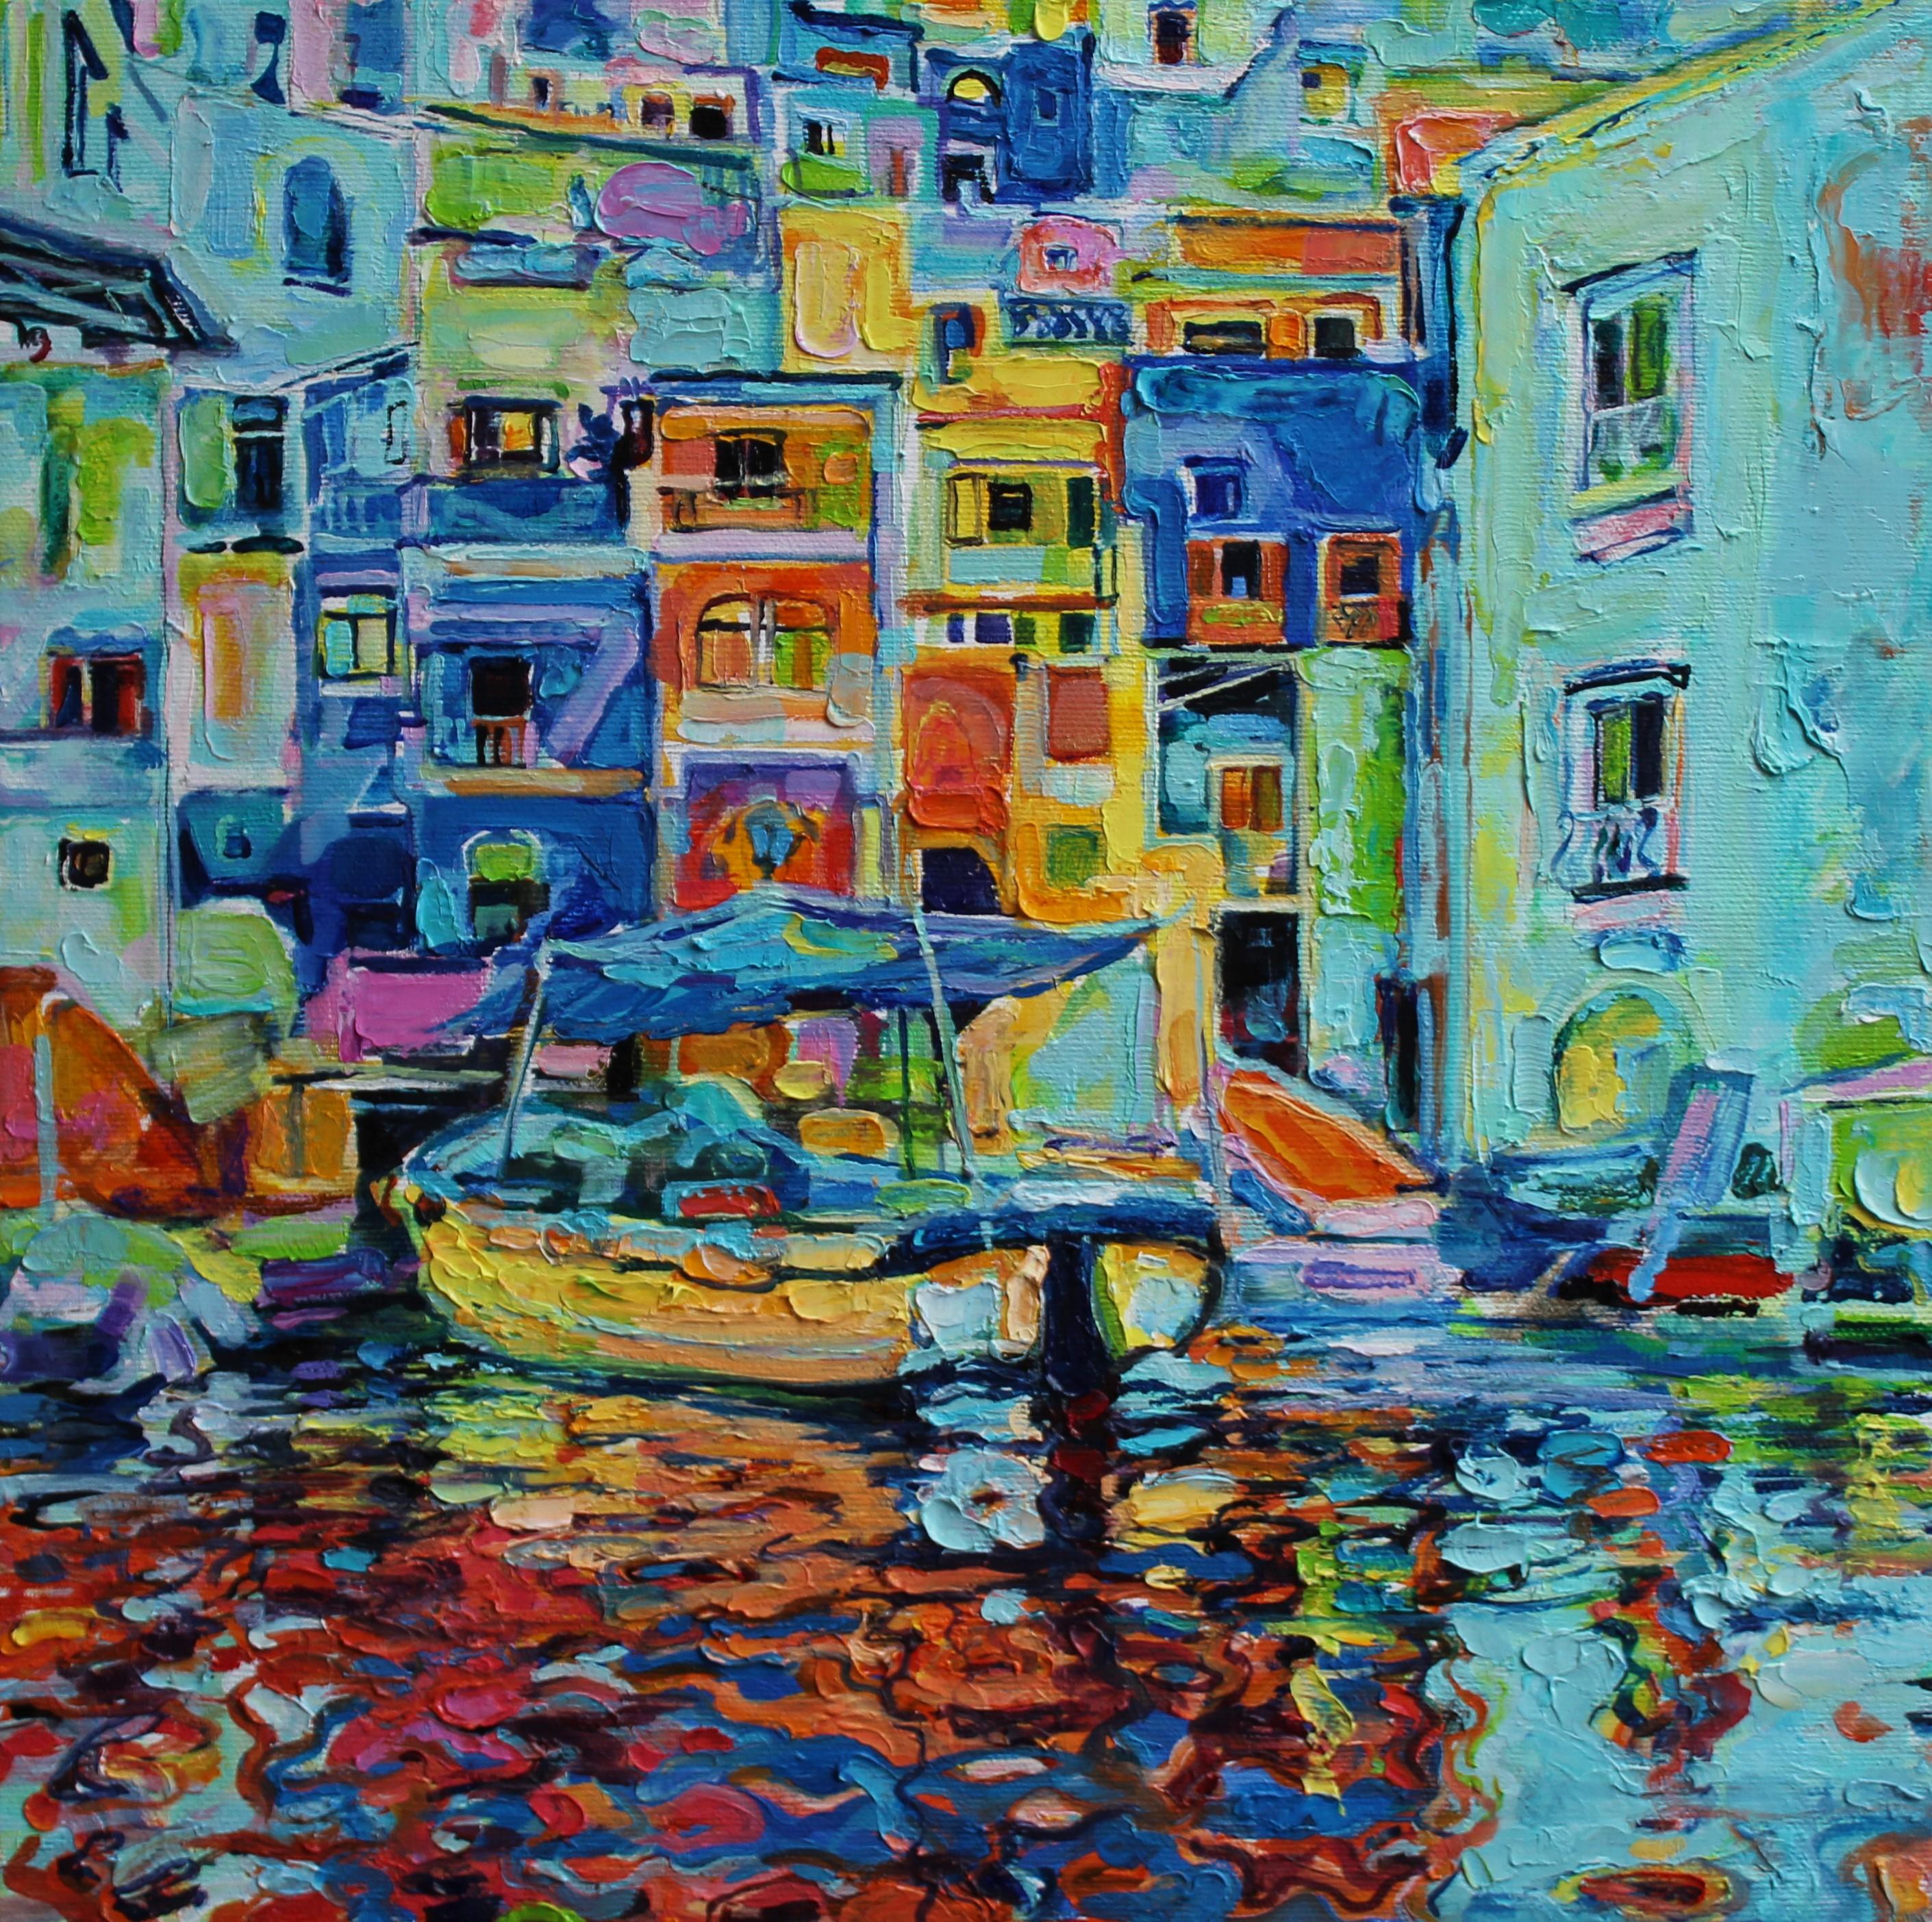 Procida Italy - Landscape Oil Painting Yellow Orange Blue White Green Brown Grey